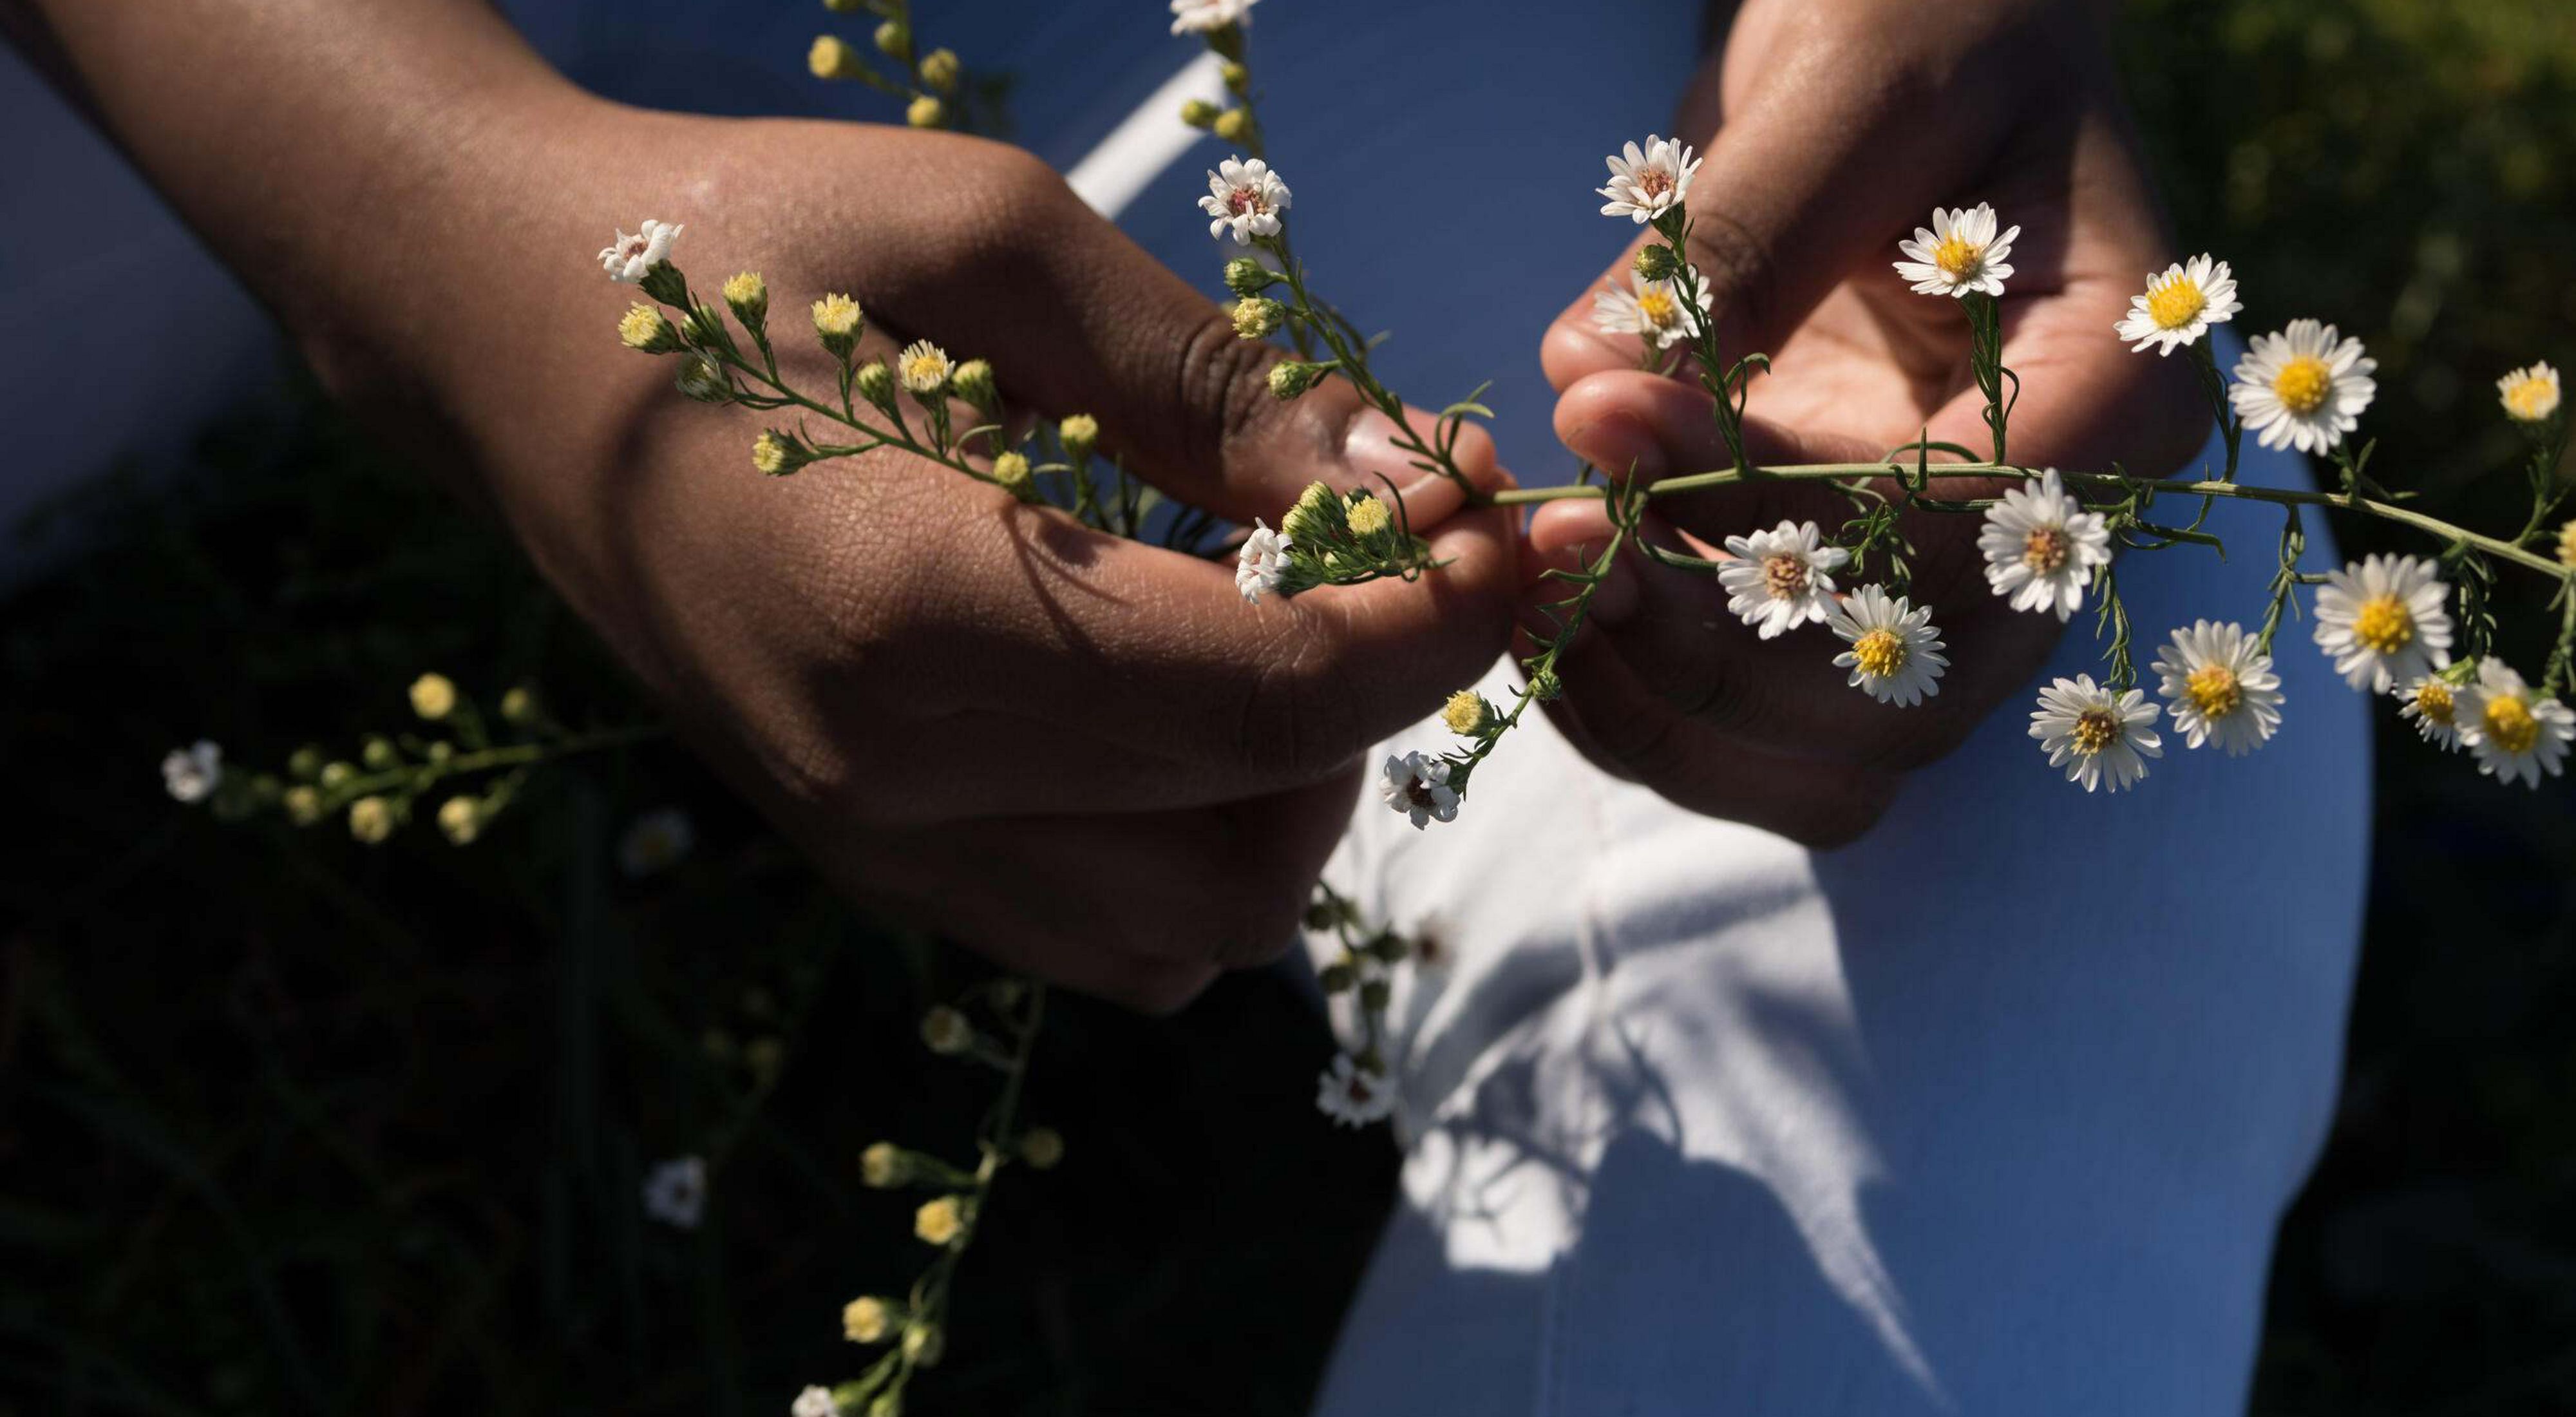 Two hands nursing a stem with small white flowers